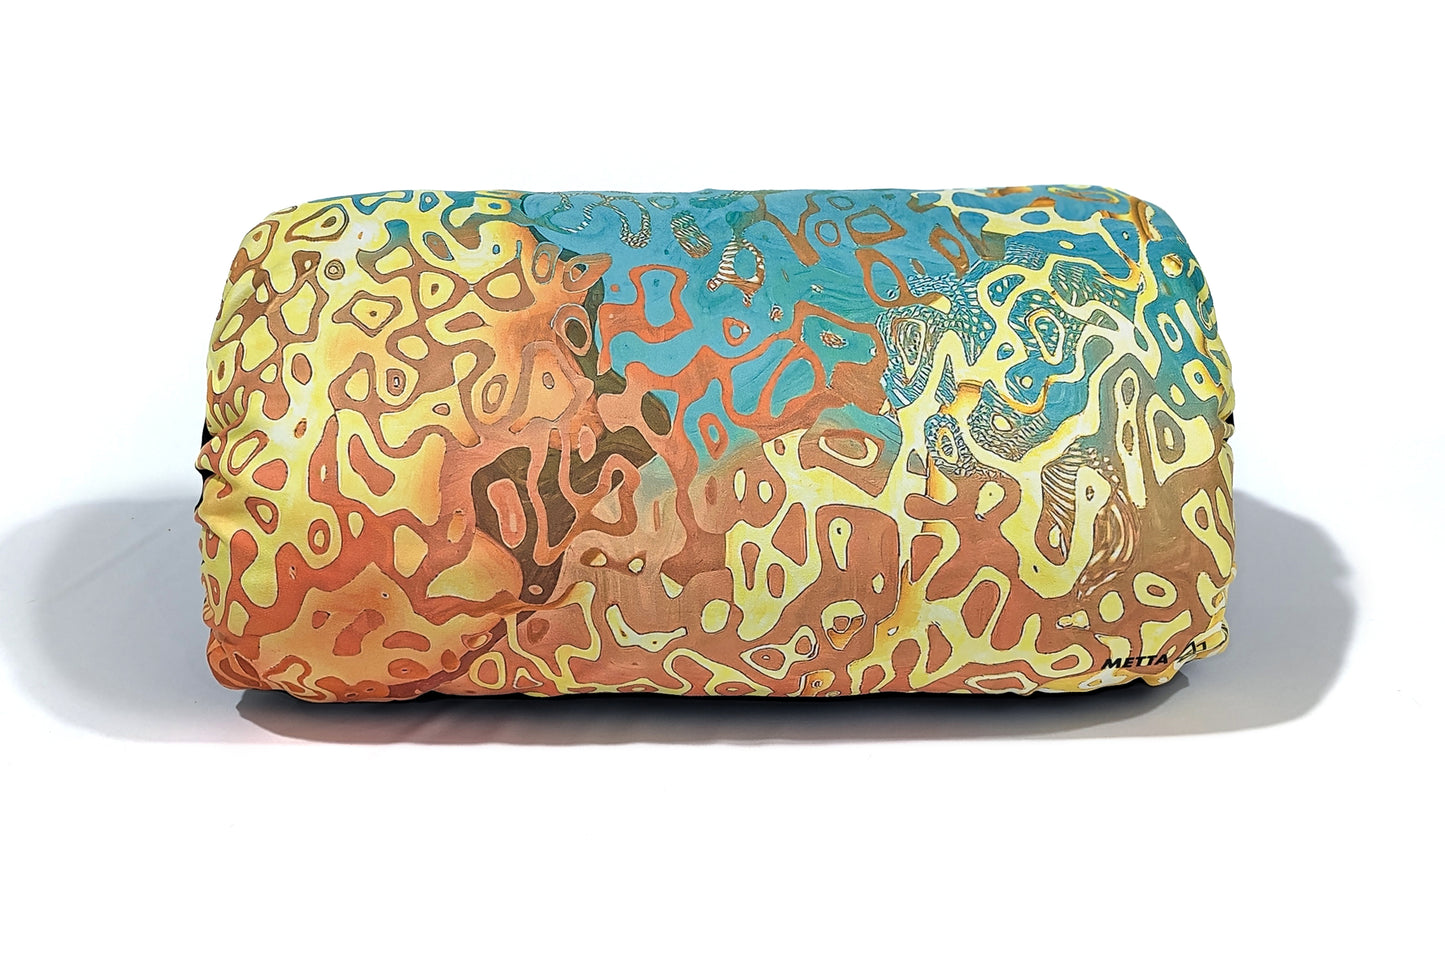 "Ancestral Messages" Bolster Cover